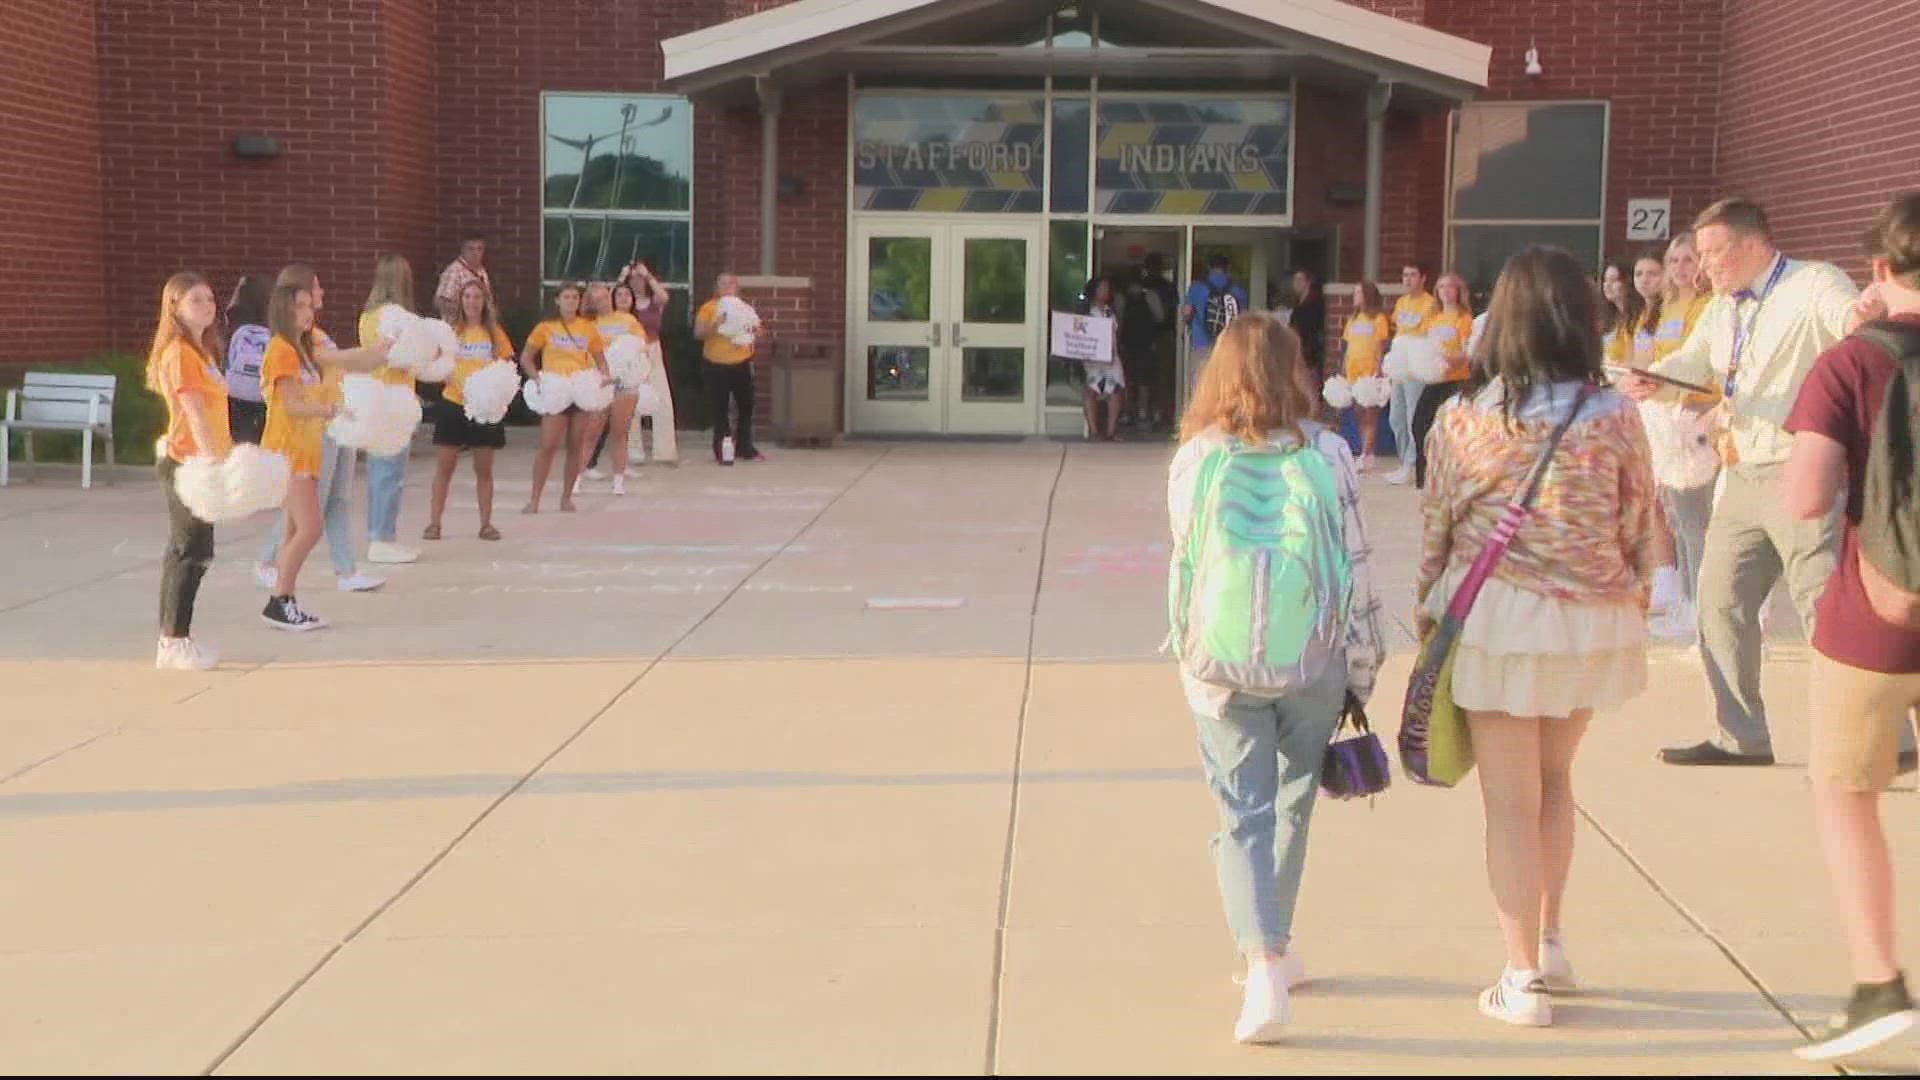 We headed over to Stafford High School in Fredericksburg -- as students showed up for their first day back at school